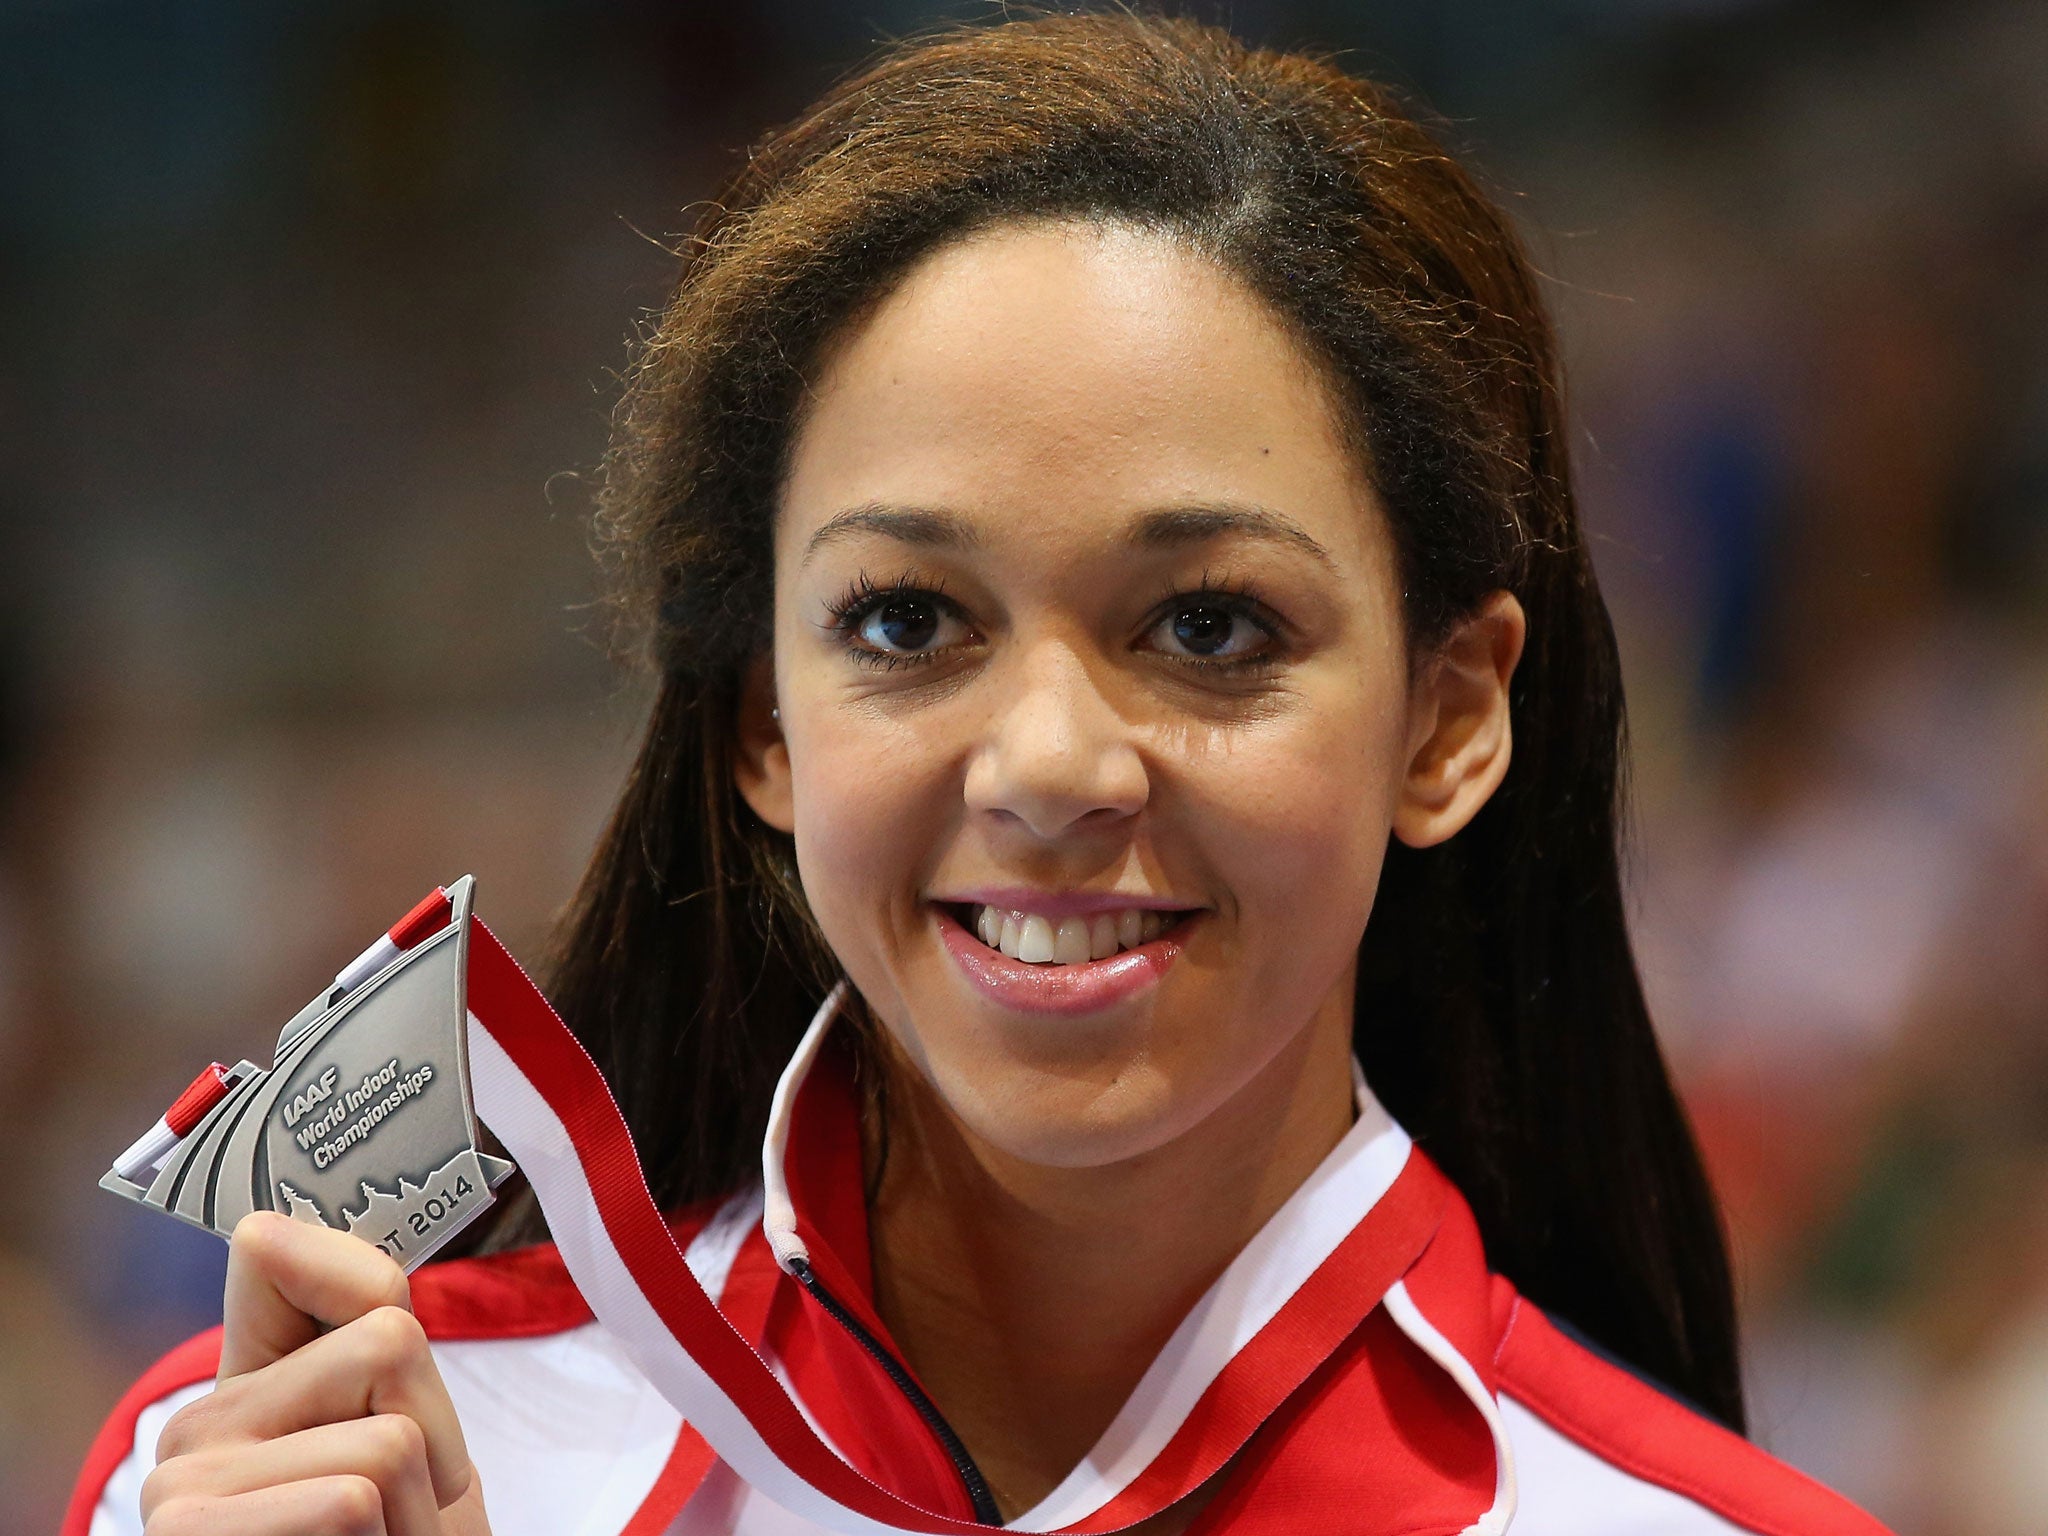 Britain's Katarina Johnson-Thompson poses with her silver medal in the Women's Long Jump